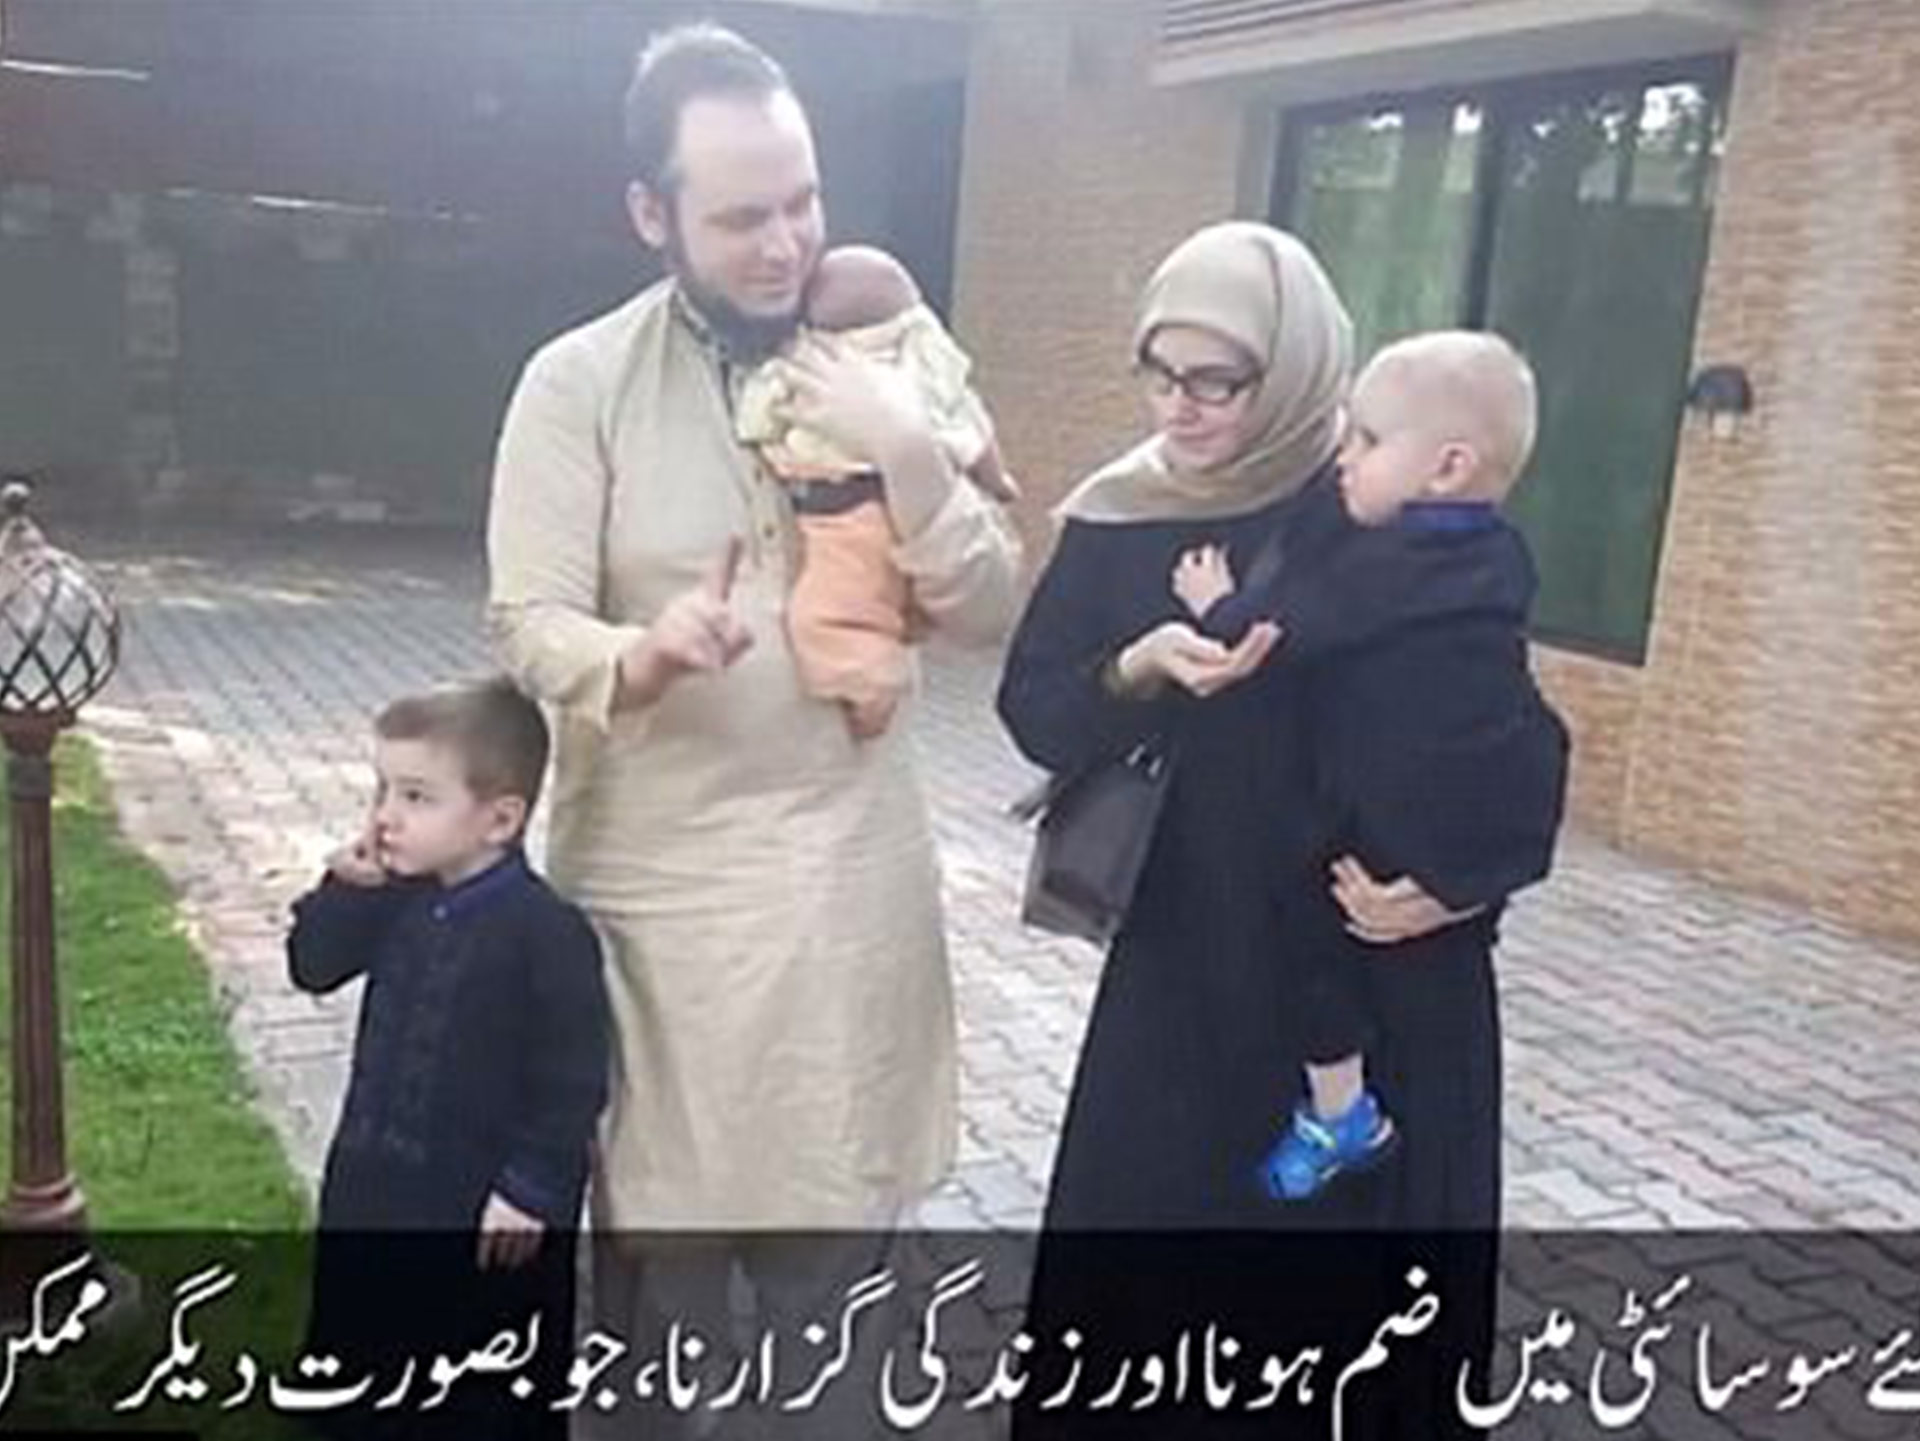 Couple explain why they had three children while being held captive in Afghanistan